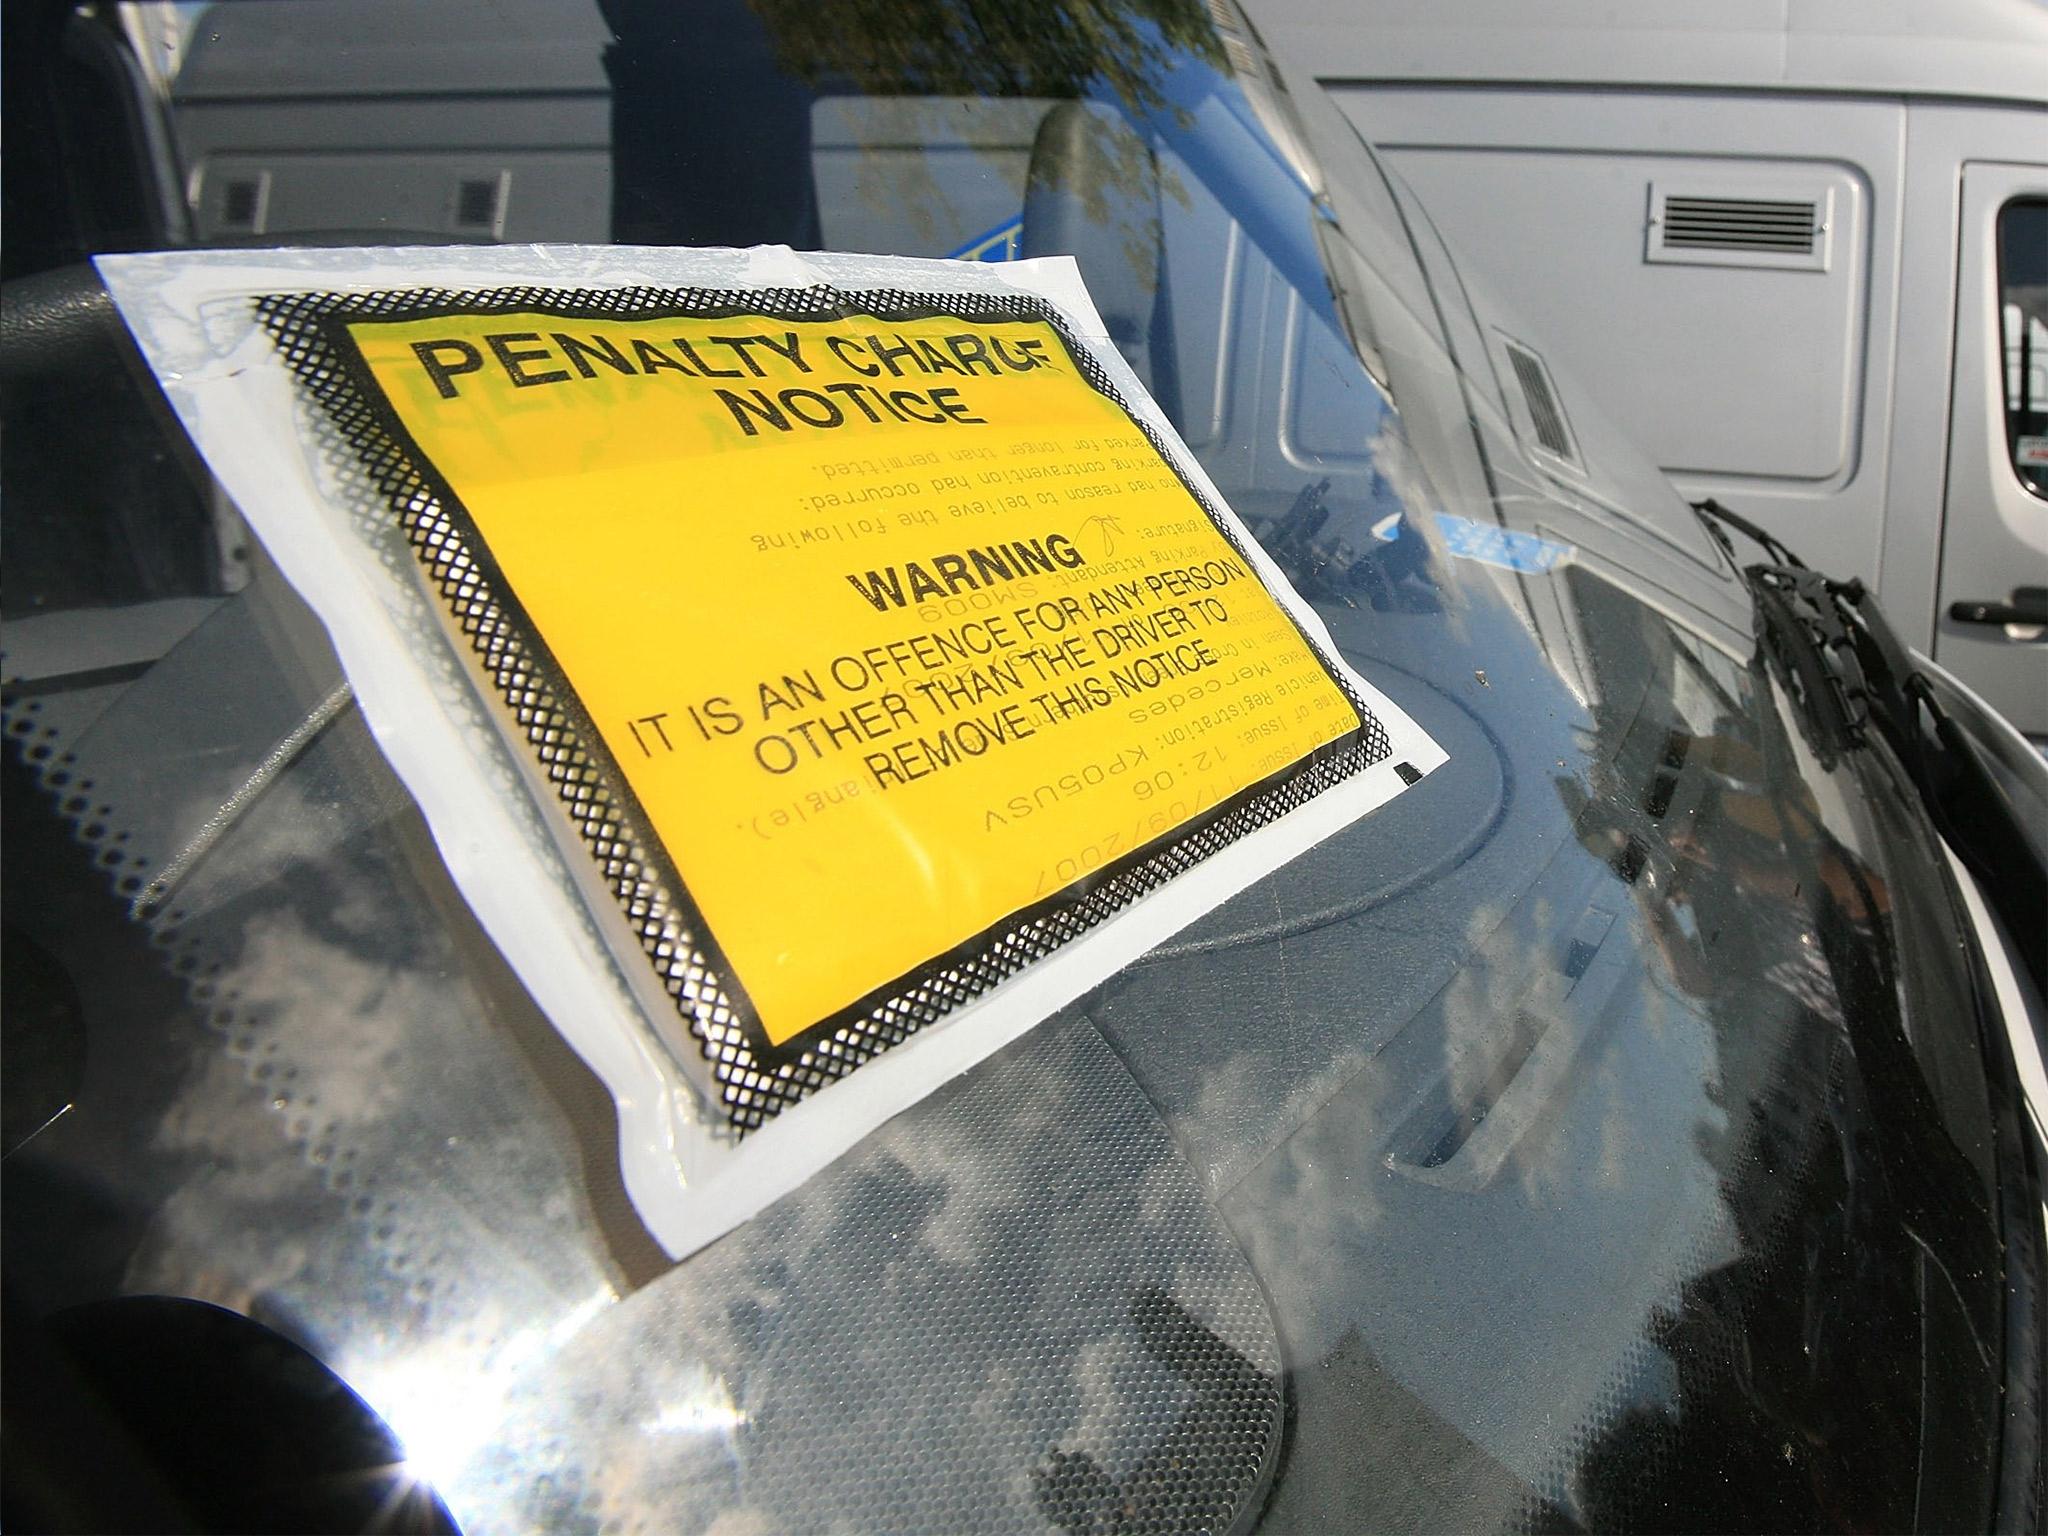 Figures showed councils in England generated £667 million in parking fines last year